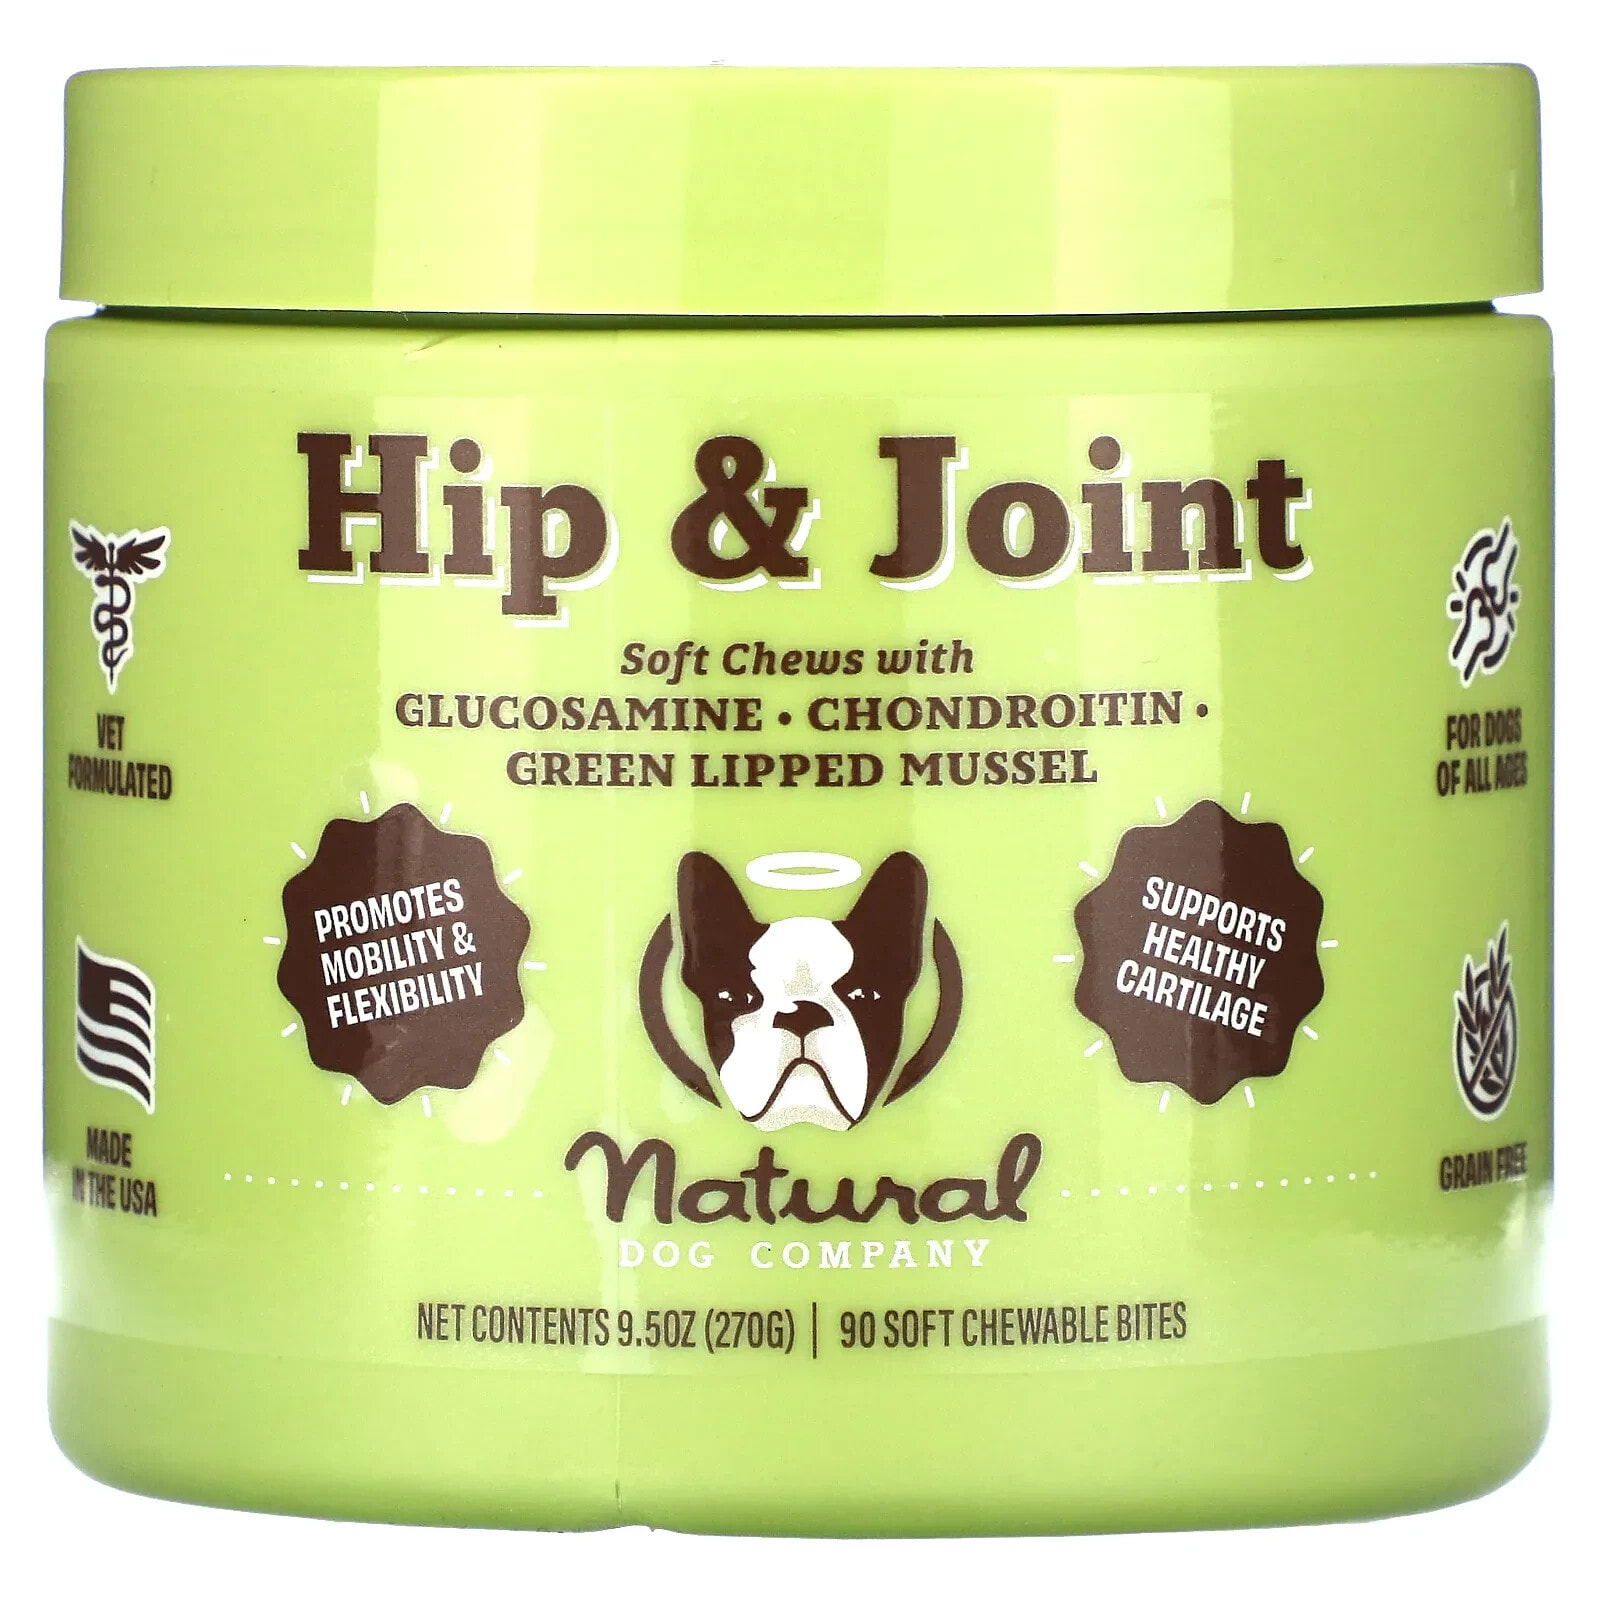 Hip & Joint, For Dogs, All Ages, 90 Soft Chewable Bites, 9.5 oz (270 g)